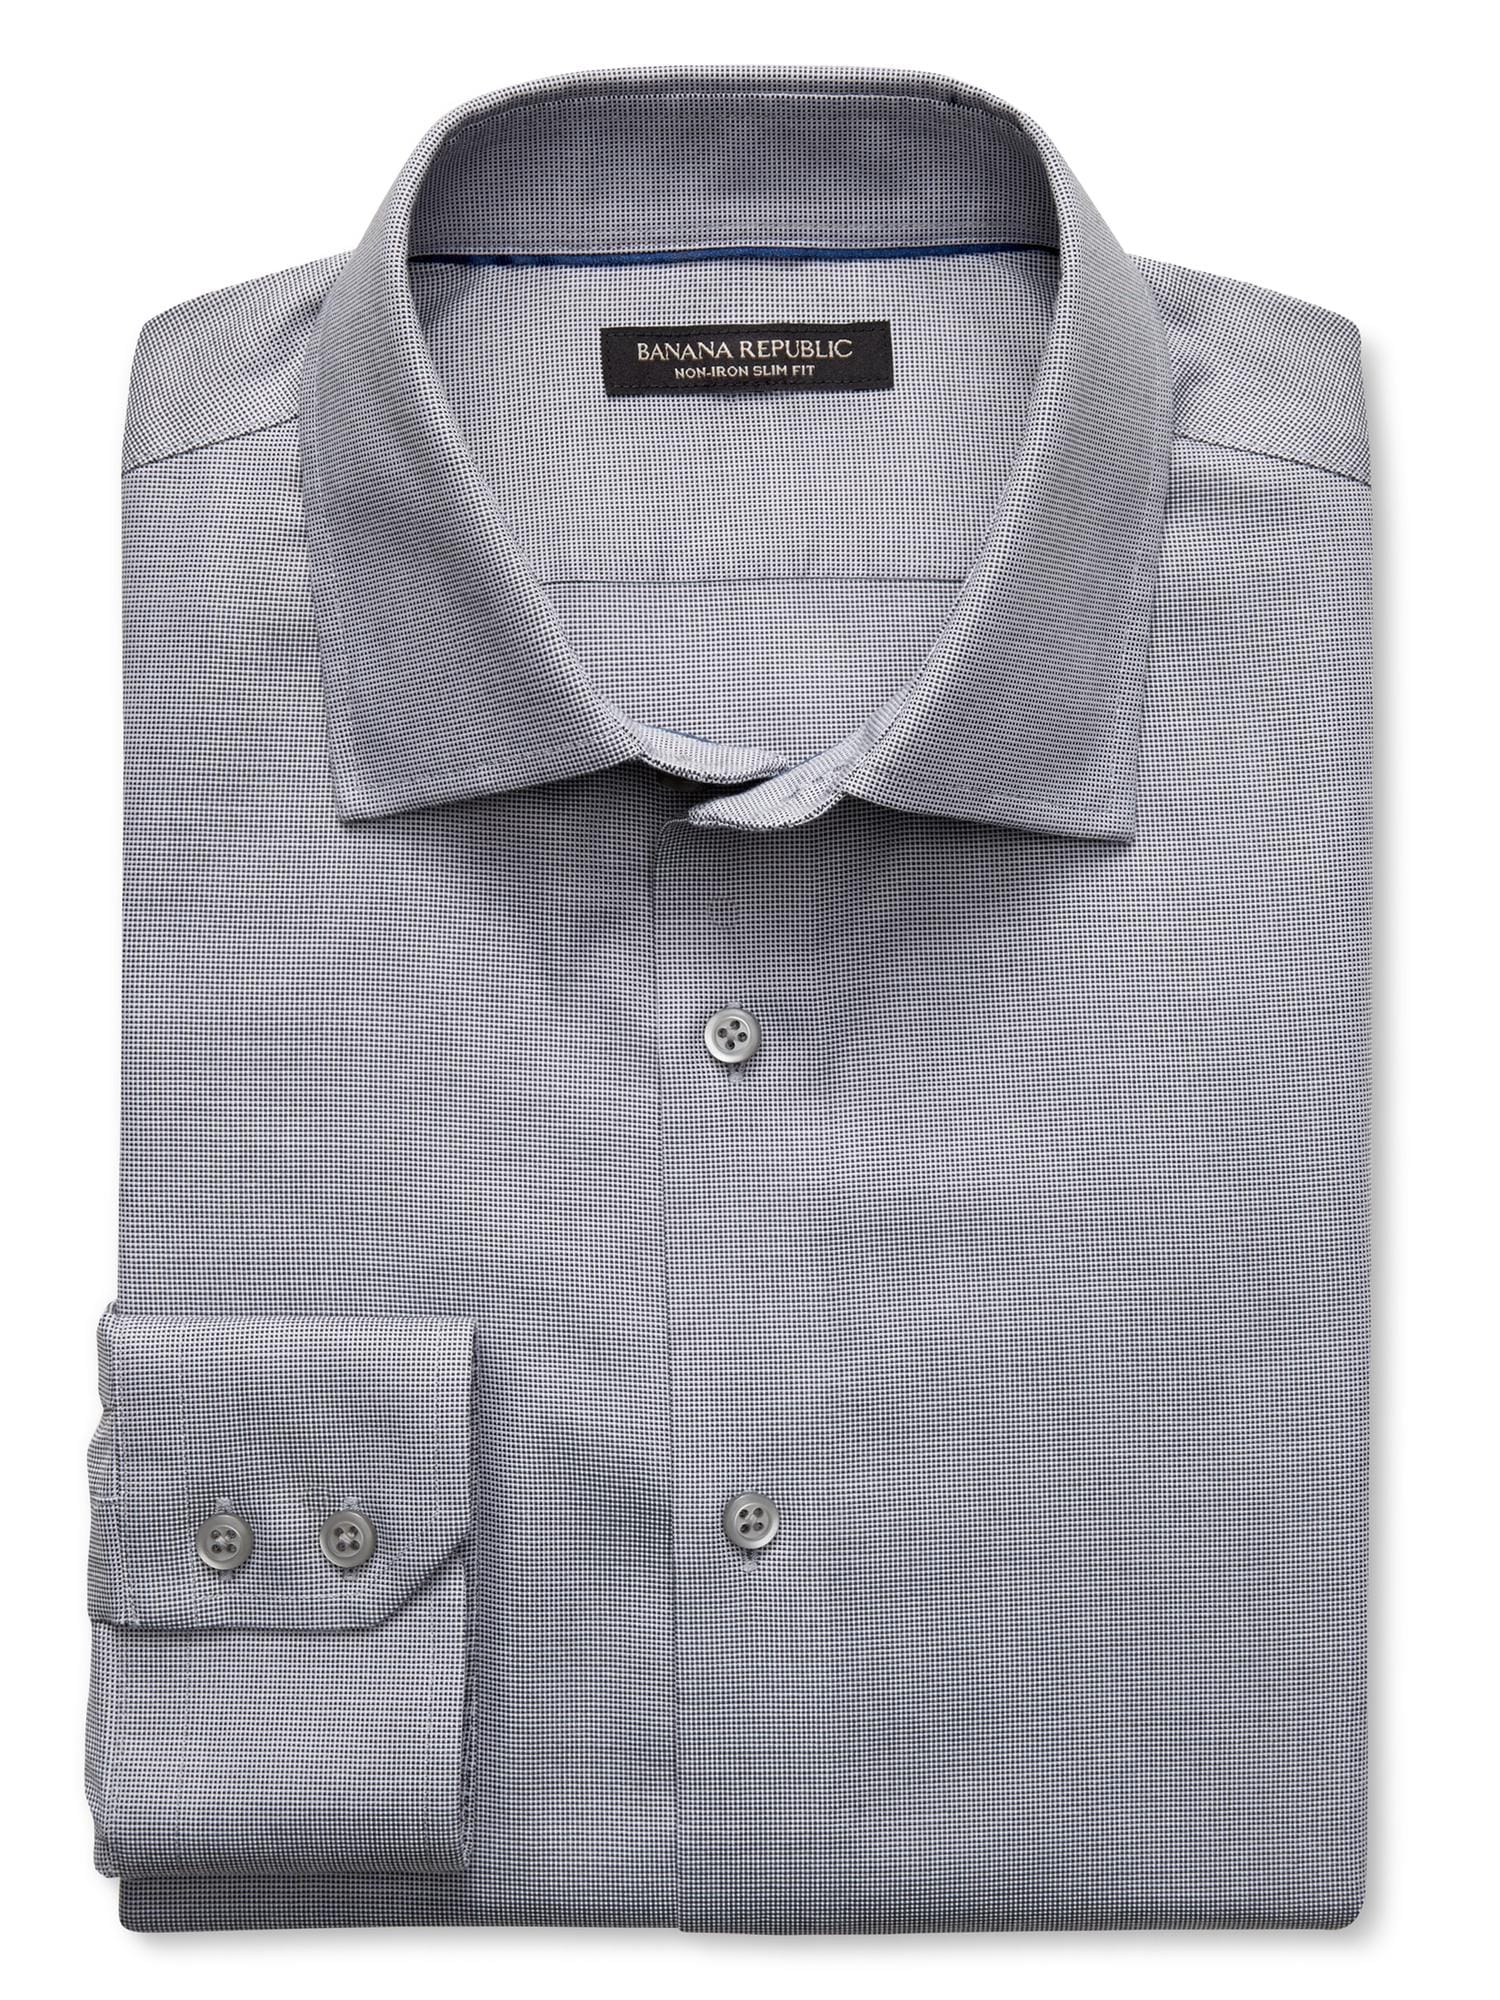 Slim Fit Non-Iron Textured Solid Shirt